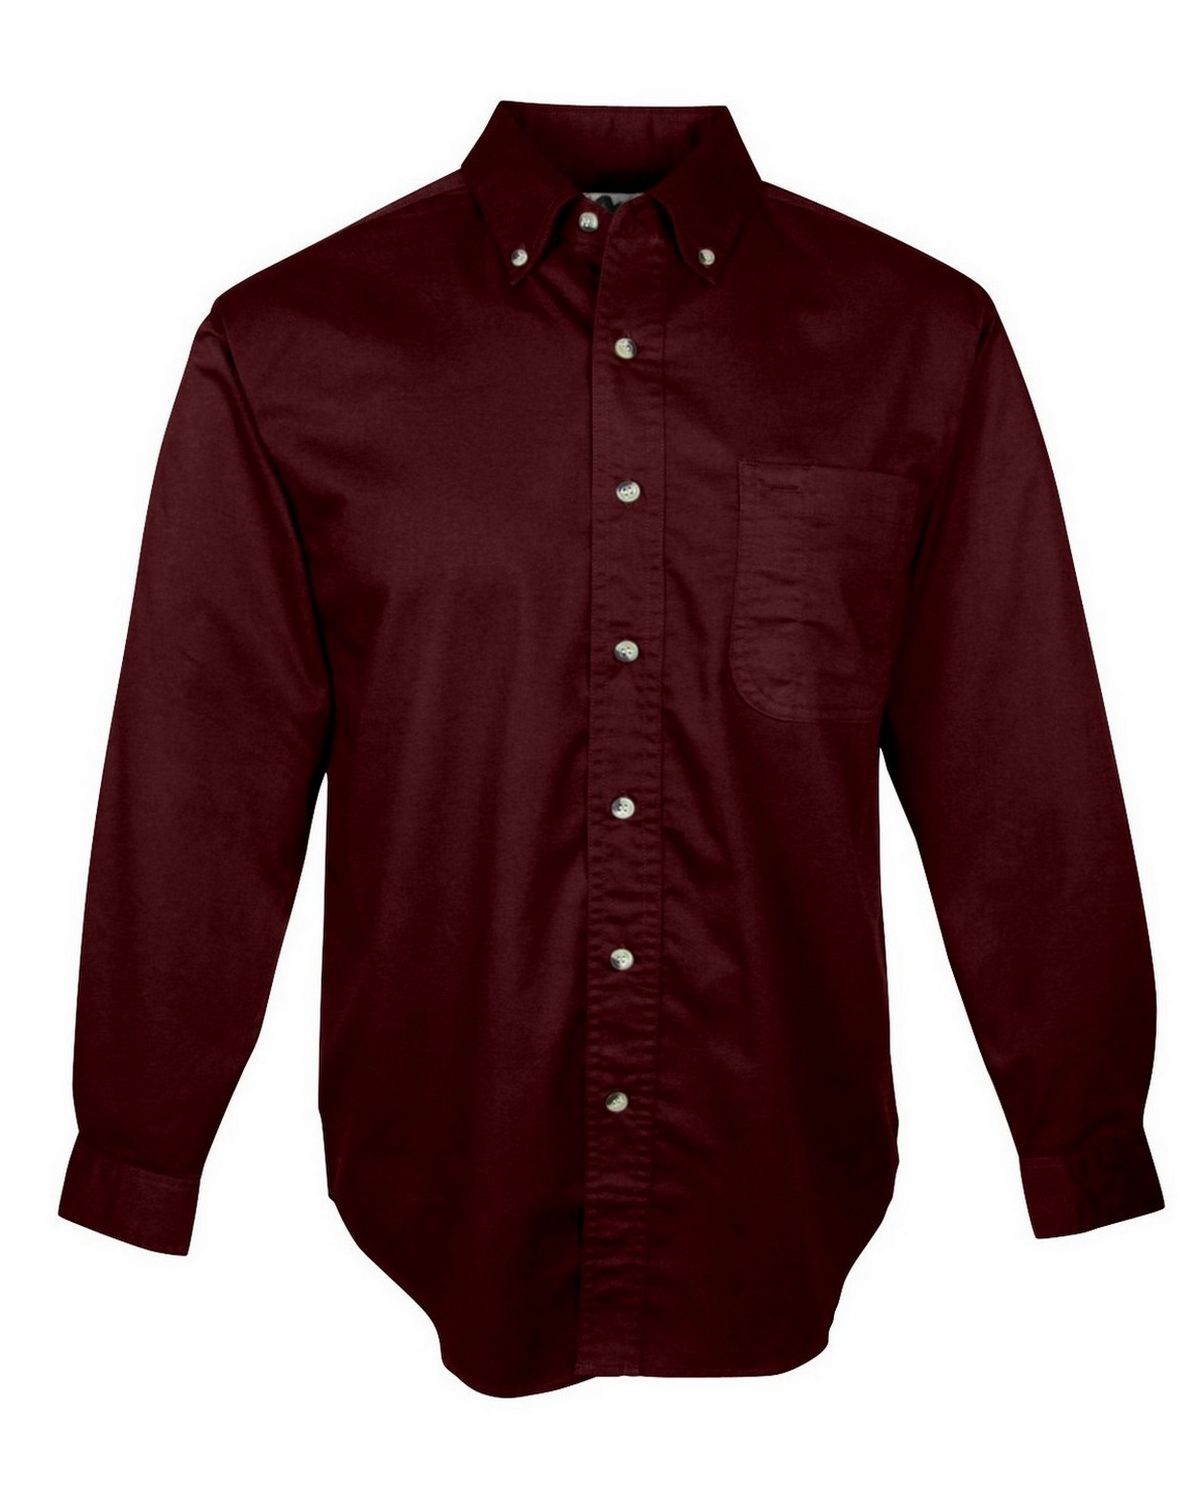 Tri-Mountain 770 Men's 60/40 stain resistant long sleeve twill shirt